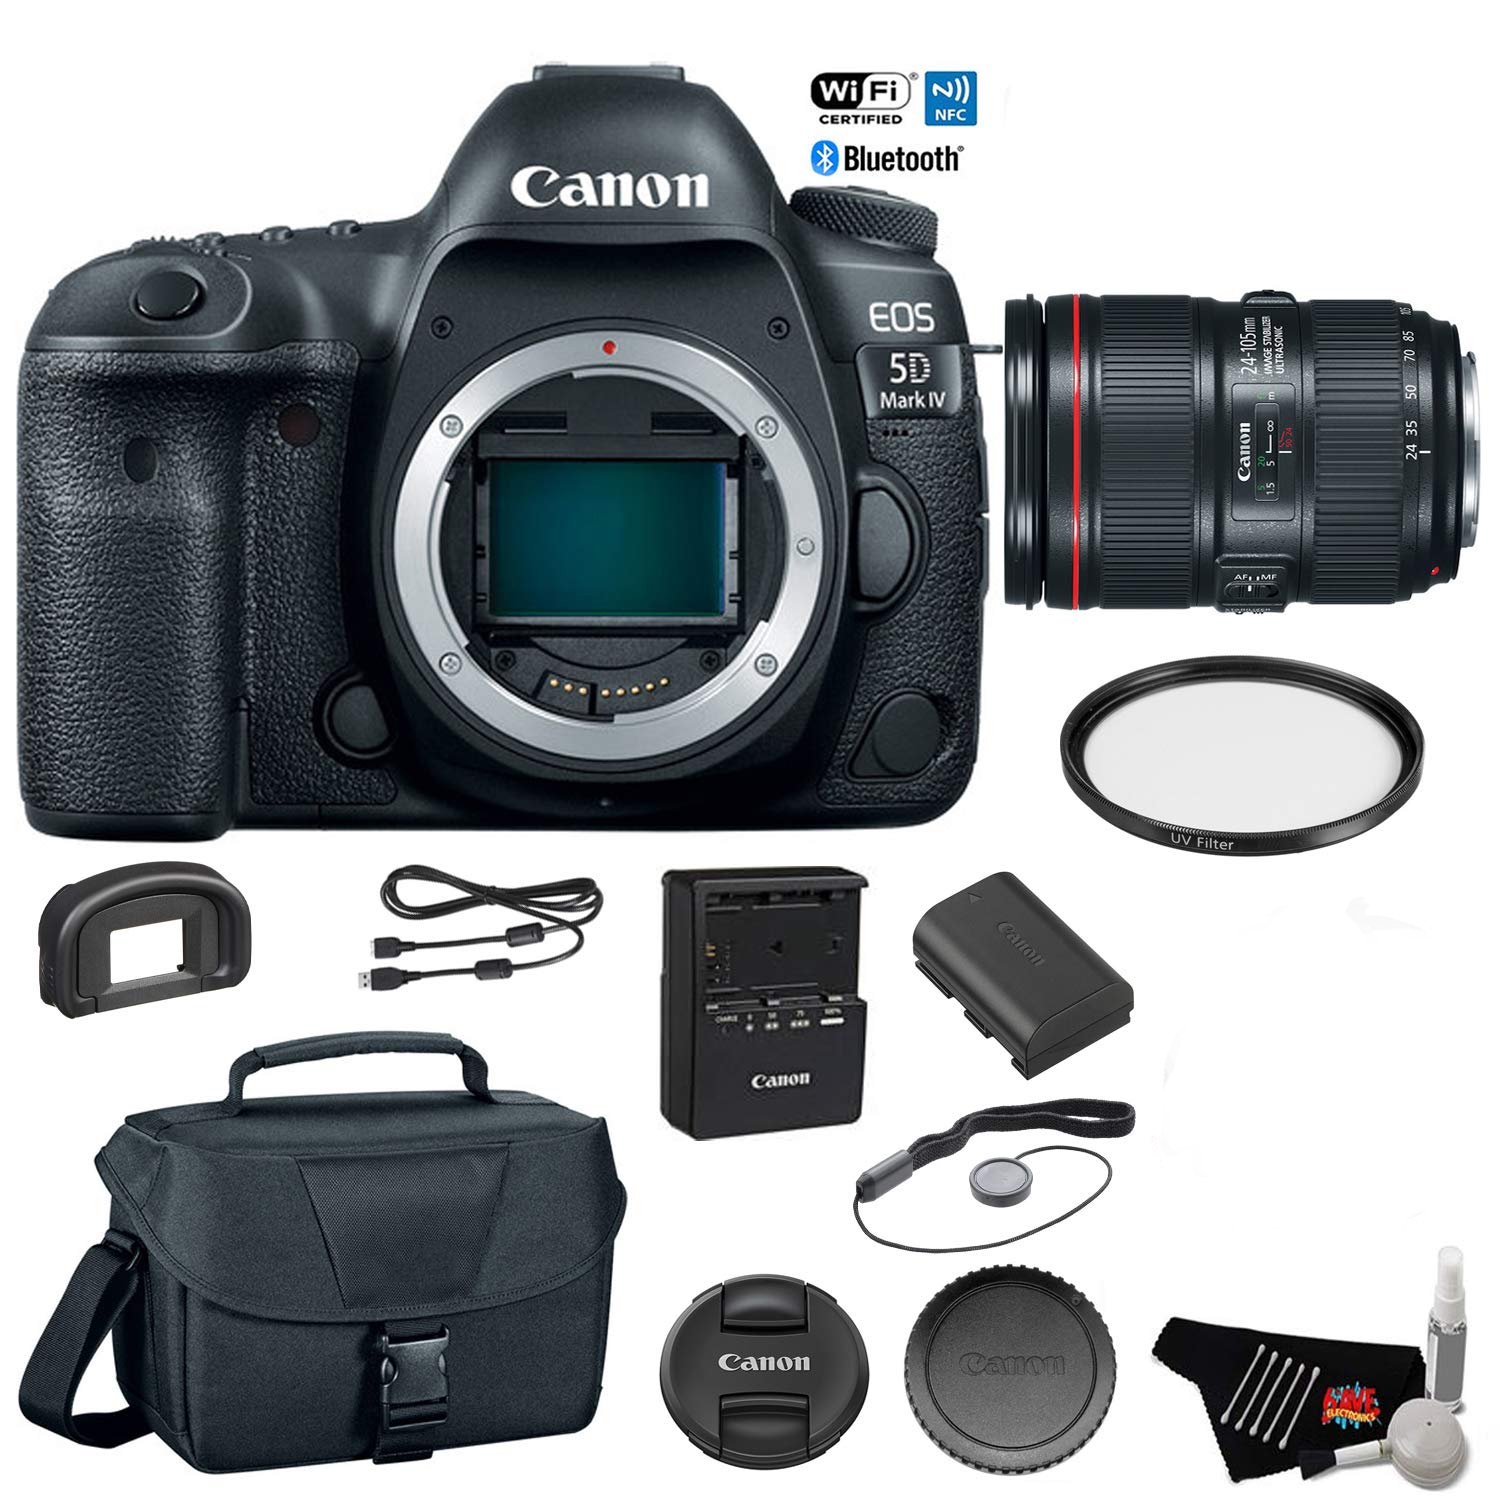 Canon EOS 5D Mark IV Digital SLR Camera with 24-105mm f/4L II Lens - Bundle with UV Filter + Canon Carrying Bag + Cleani - image 1 of 6